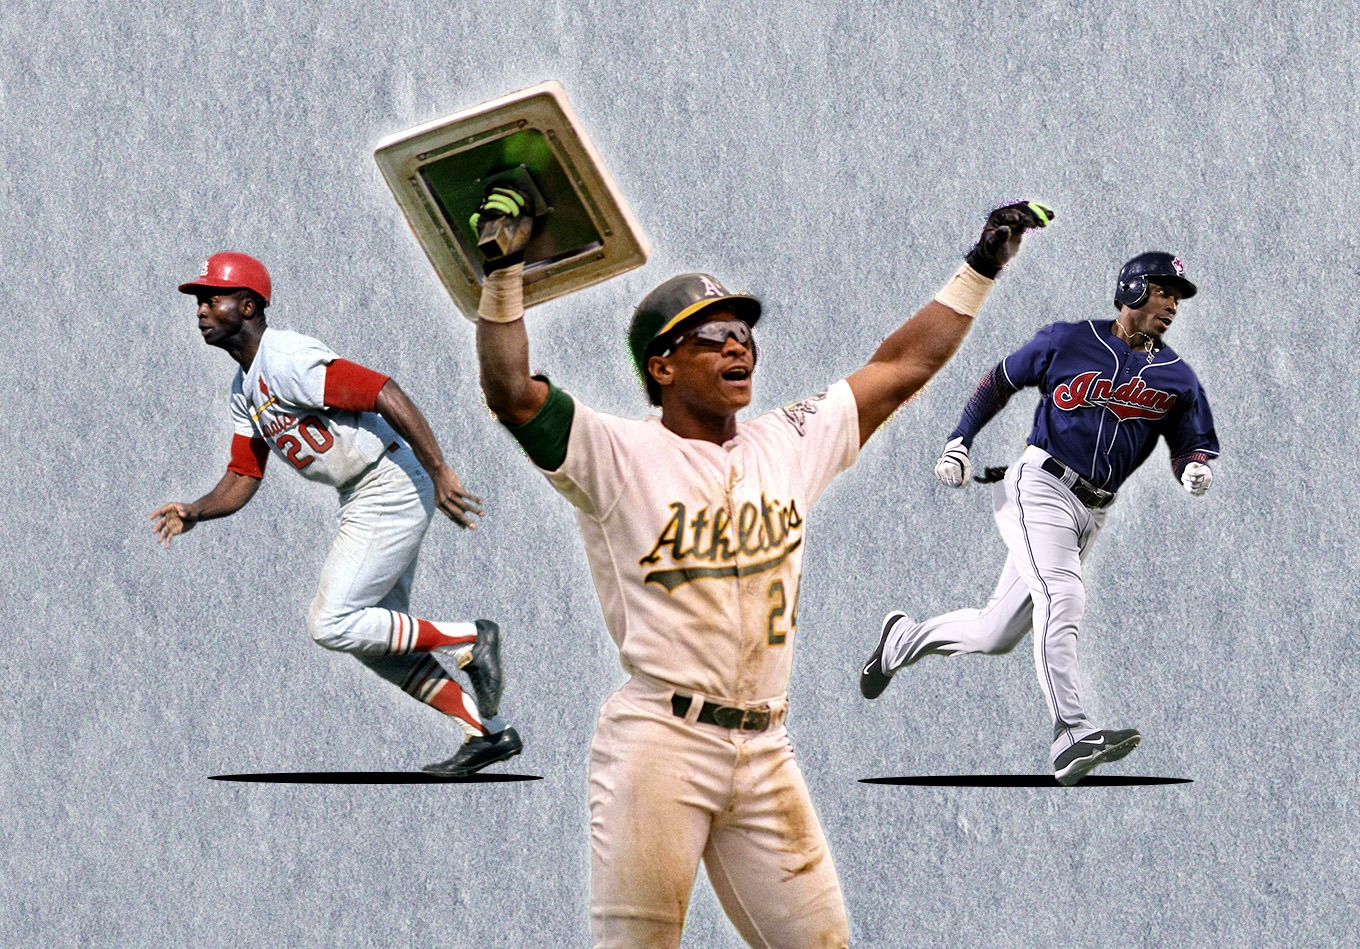 It Takes a Thief: The Players, Teams, Seasons That Hold Baseball’s Stolen Base Records